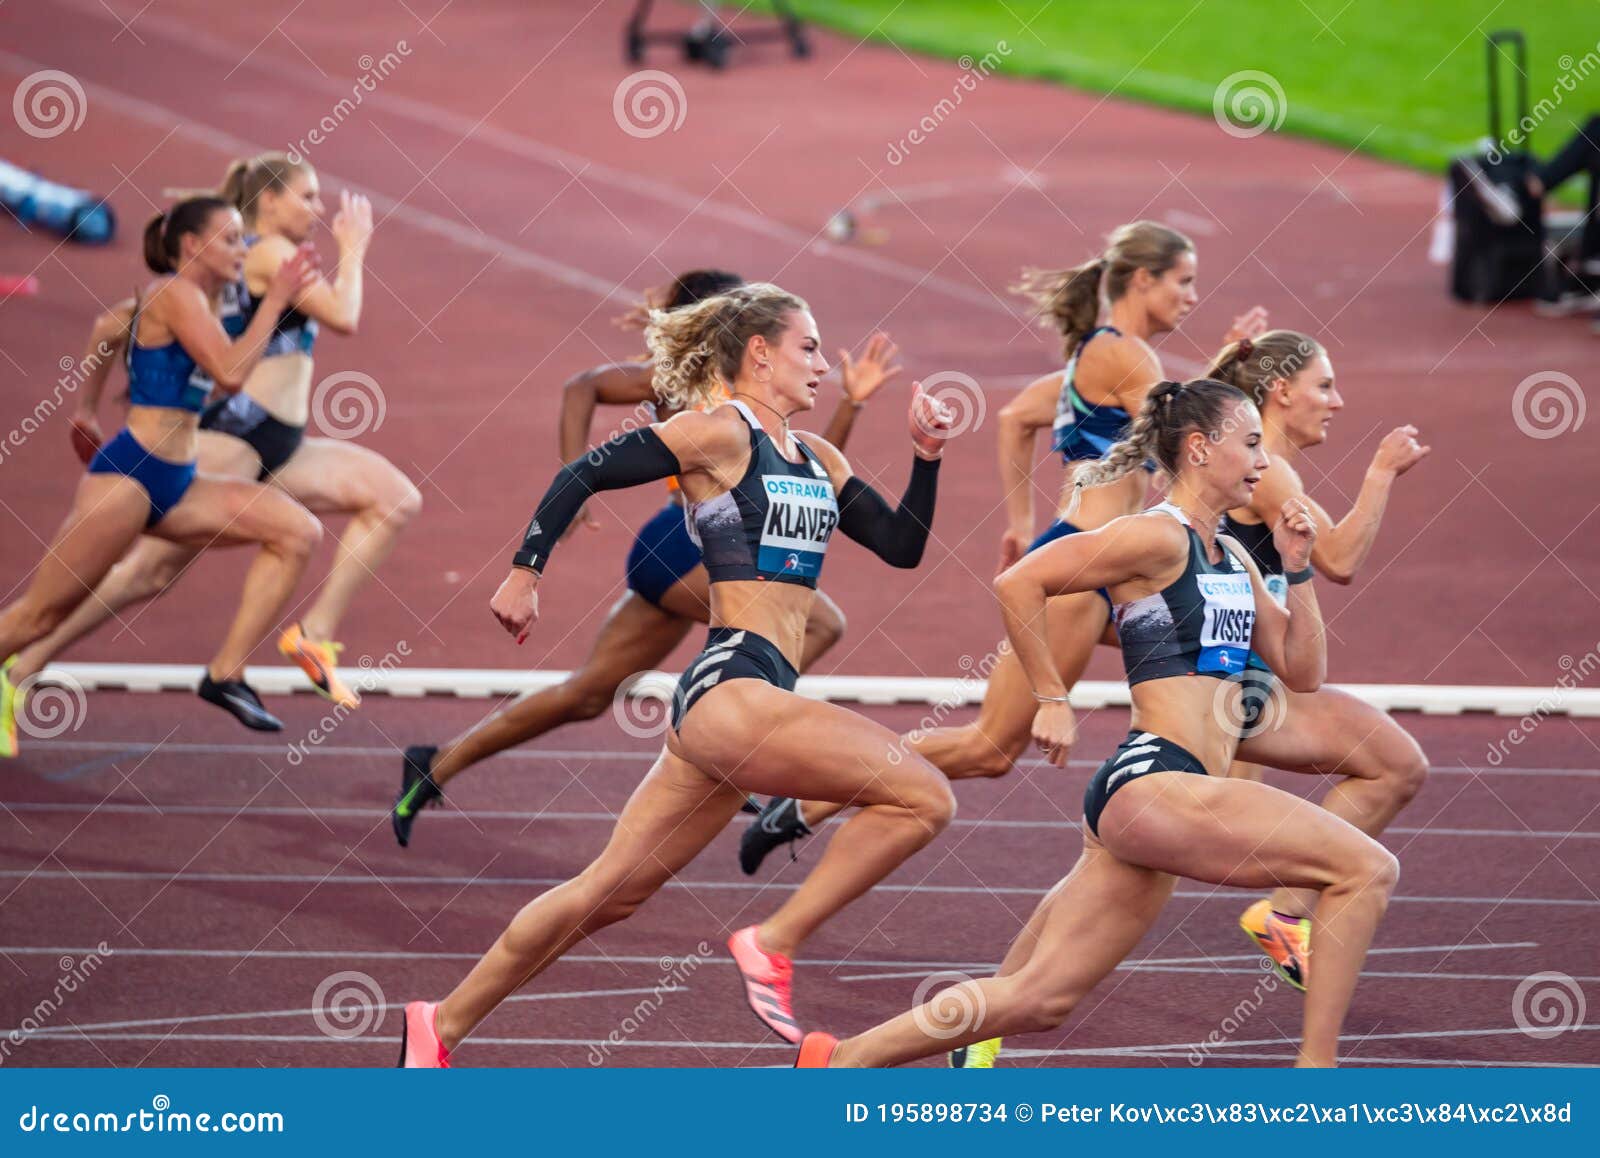 OSTRAVA, CZECH REPUBLIC, SEPTEMBER 8. 2020: Sprinters Race, Professional Track  and Field Sprint Race, Athletes on the Track. Editorial Stock Image - Image  of field, cissa: 195898734